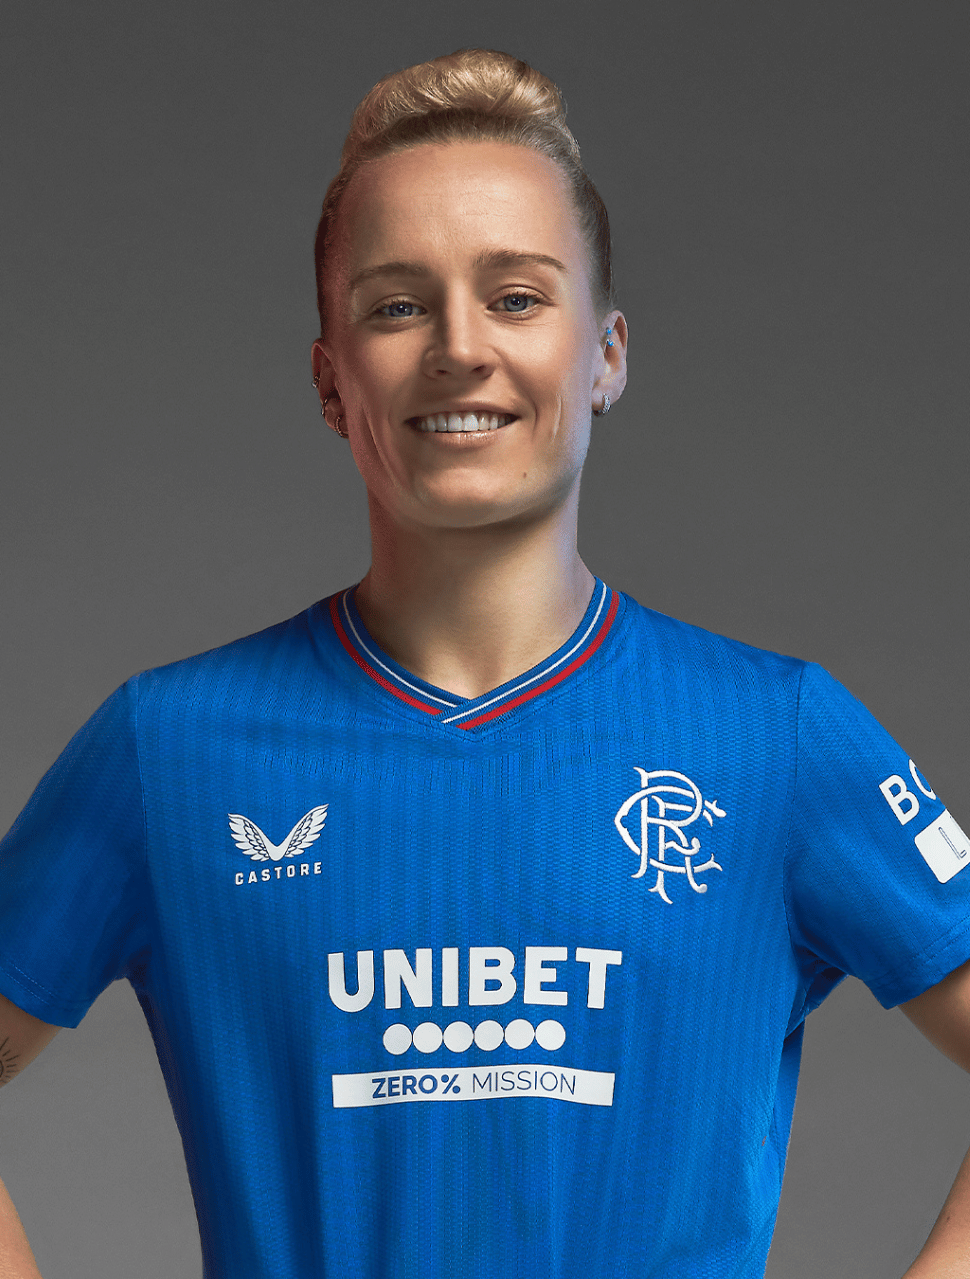 New Rangers kit 23/24 unveiled: Where to buy the home shirt